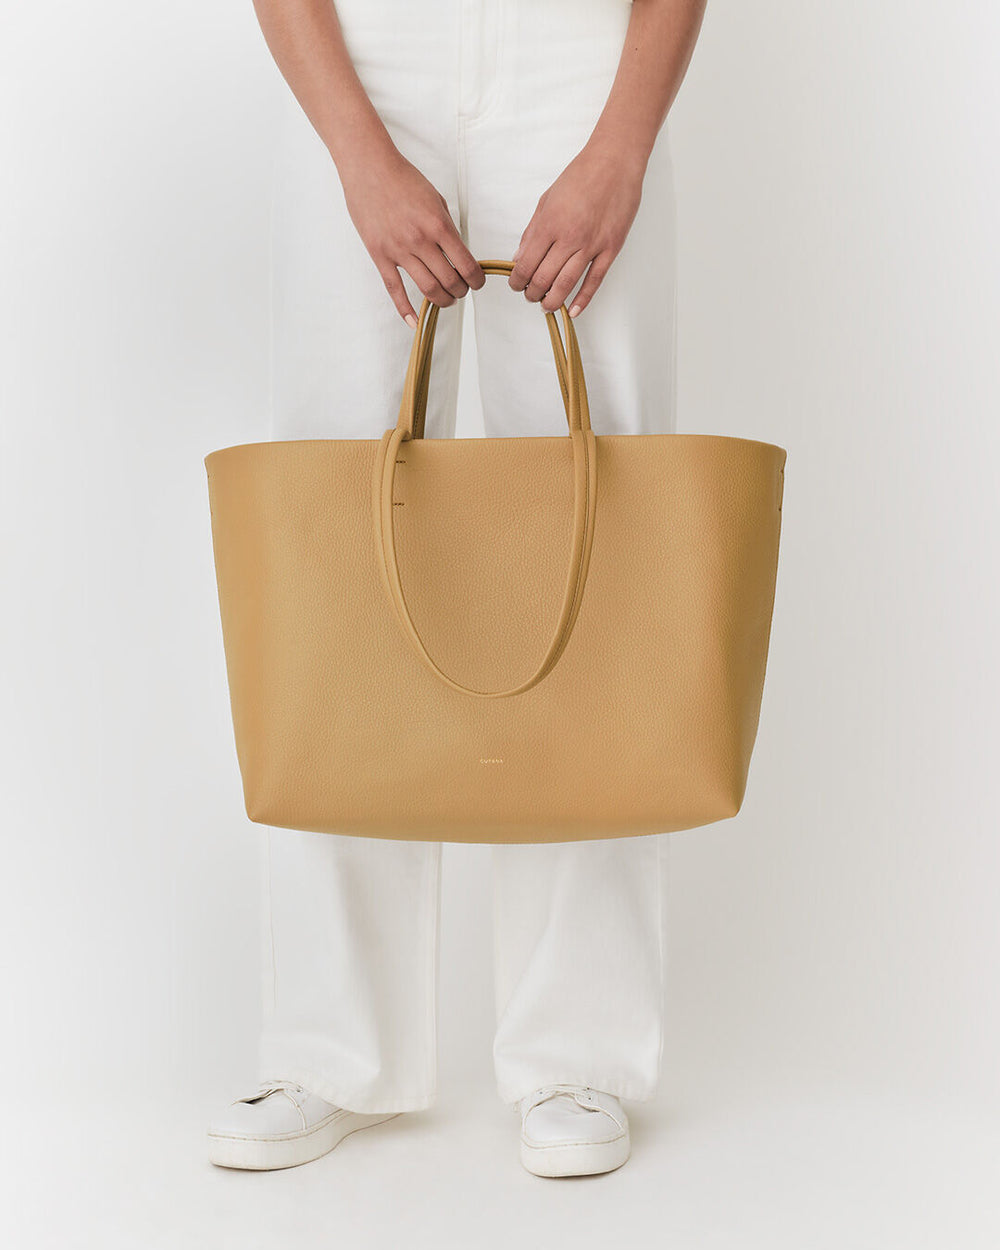 Person standing and holding a large handbag.